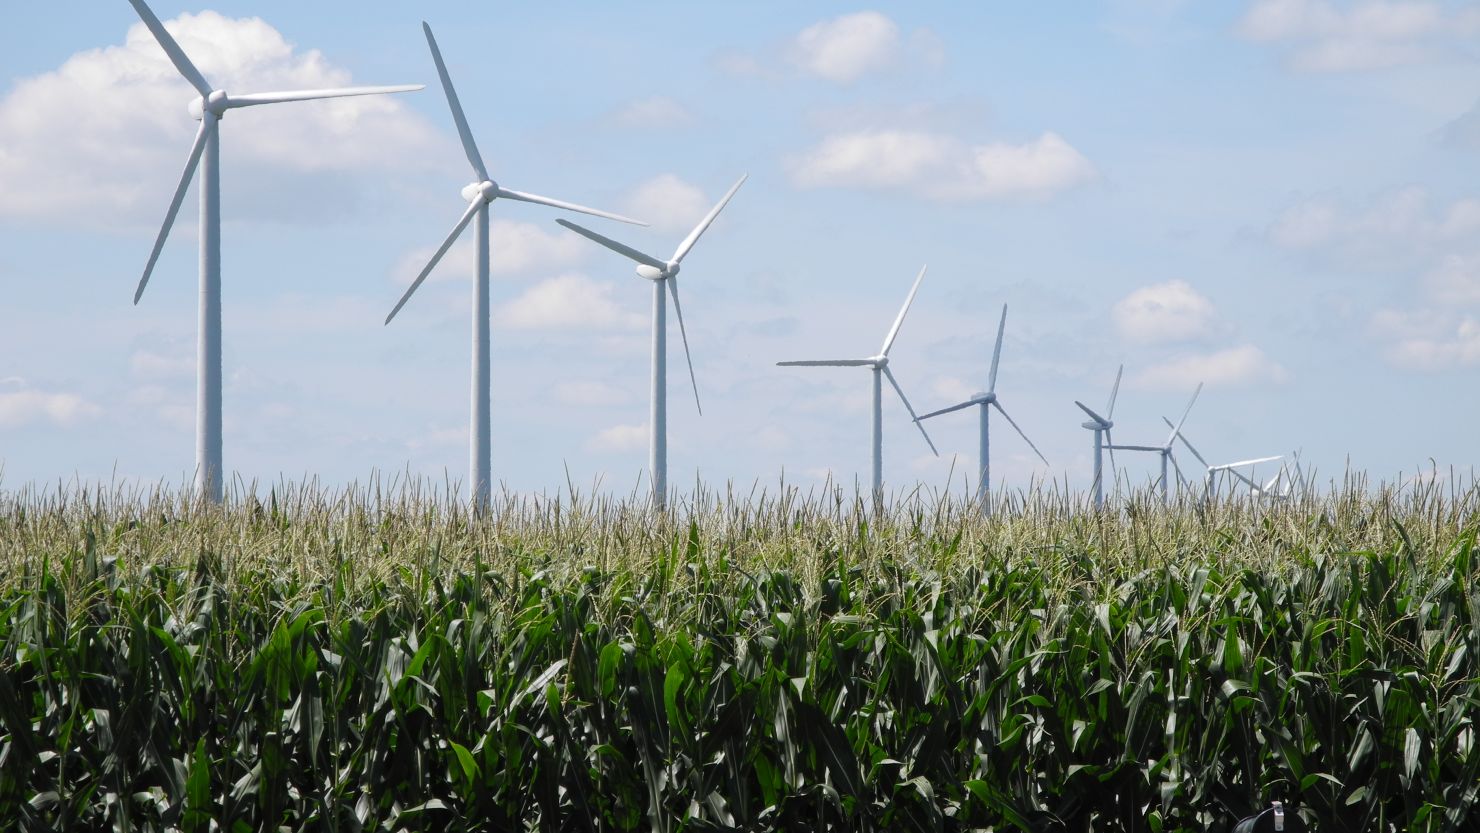 Century Wind Farm generates power in Iowa in 2011. In a new report, researchers say the U.S. needs to overhaul its support for clean energy as subsidies start to expire.